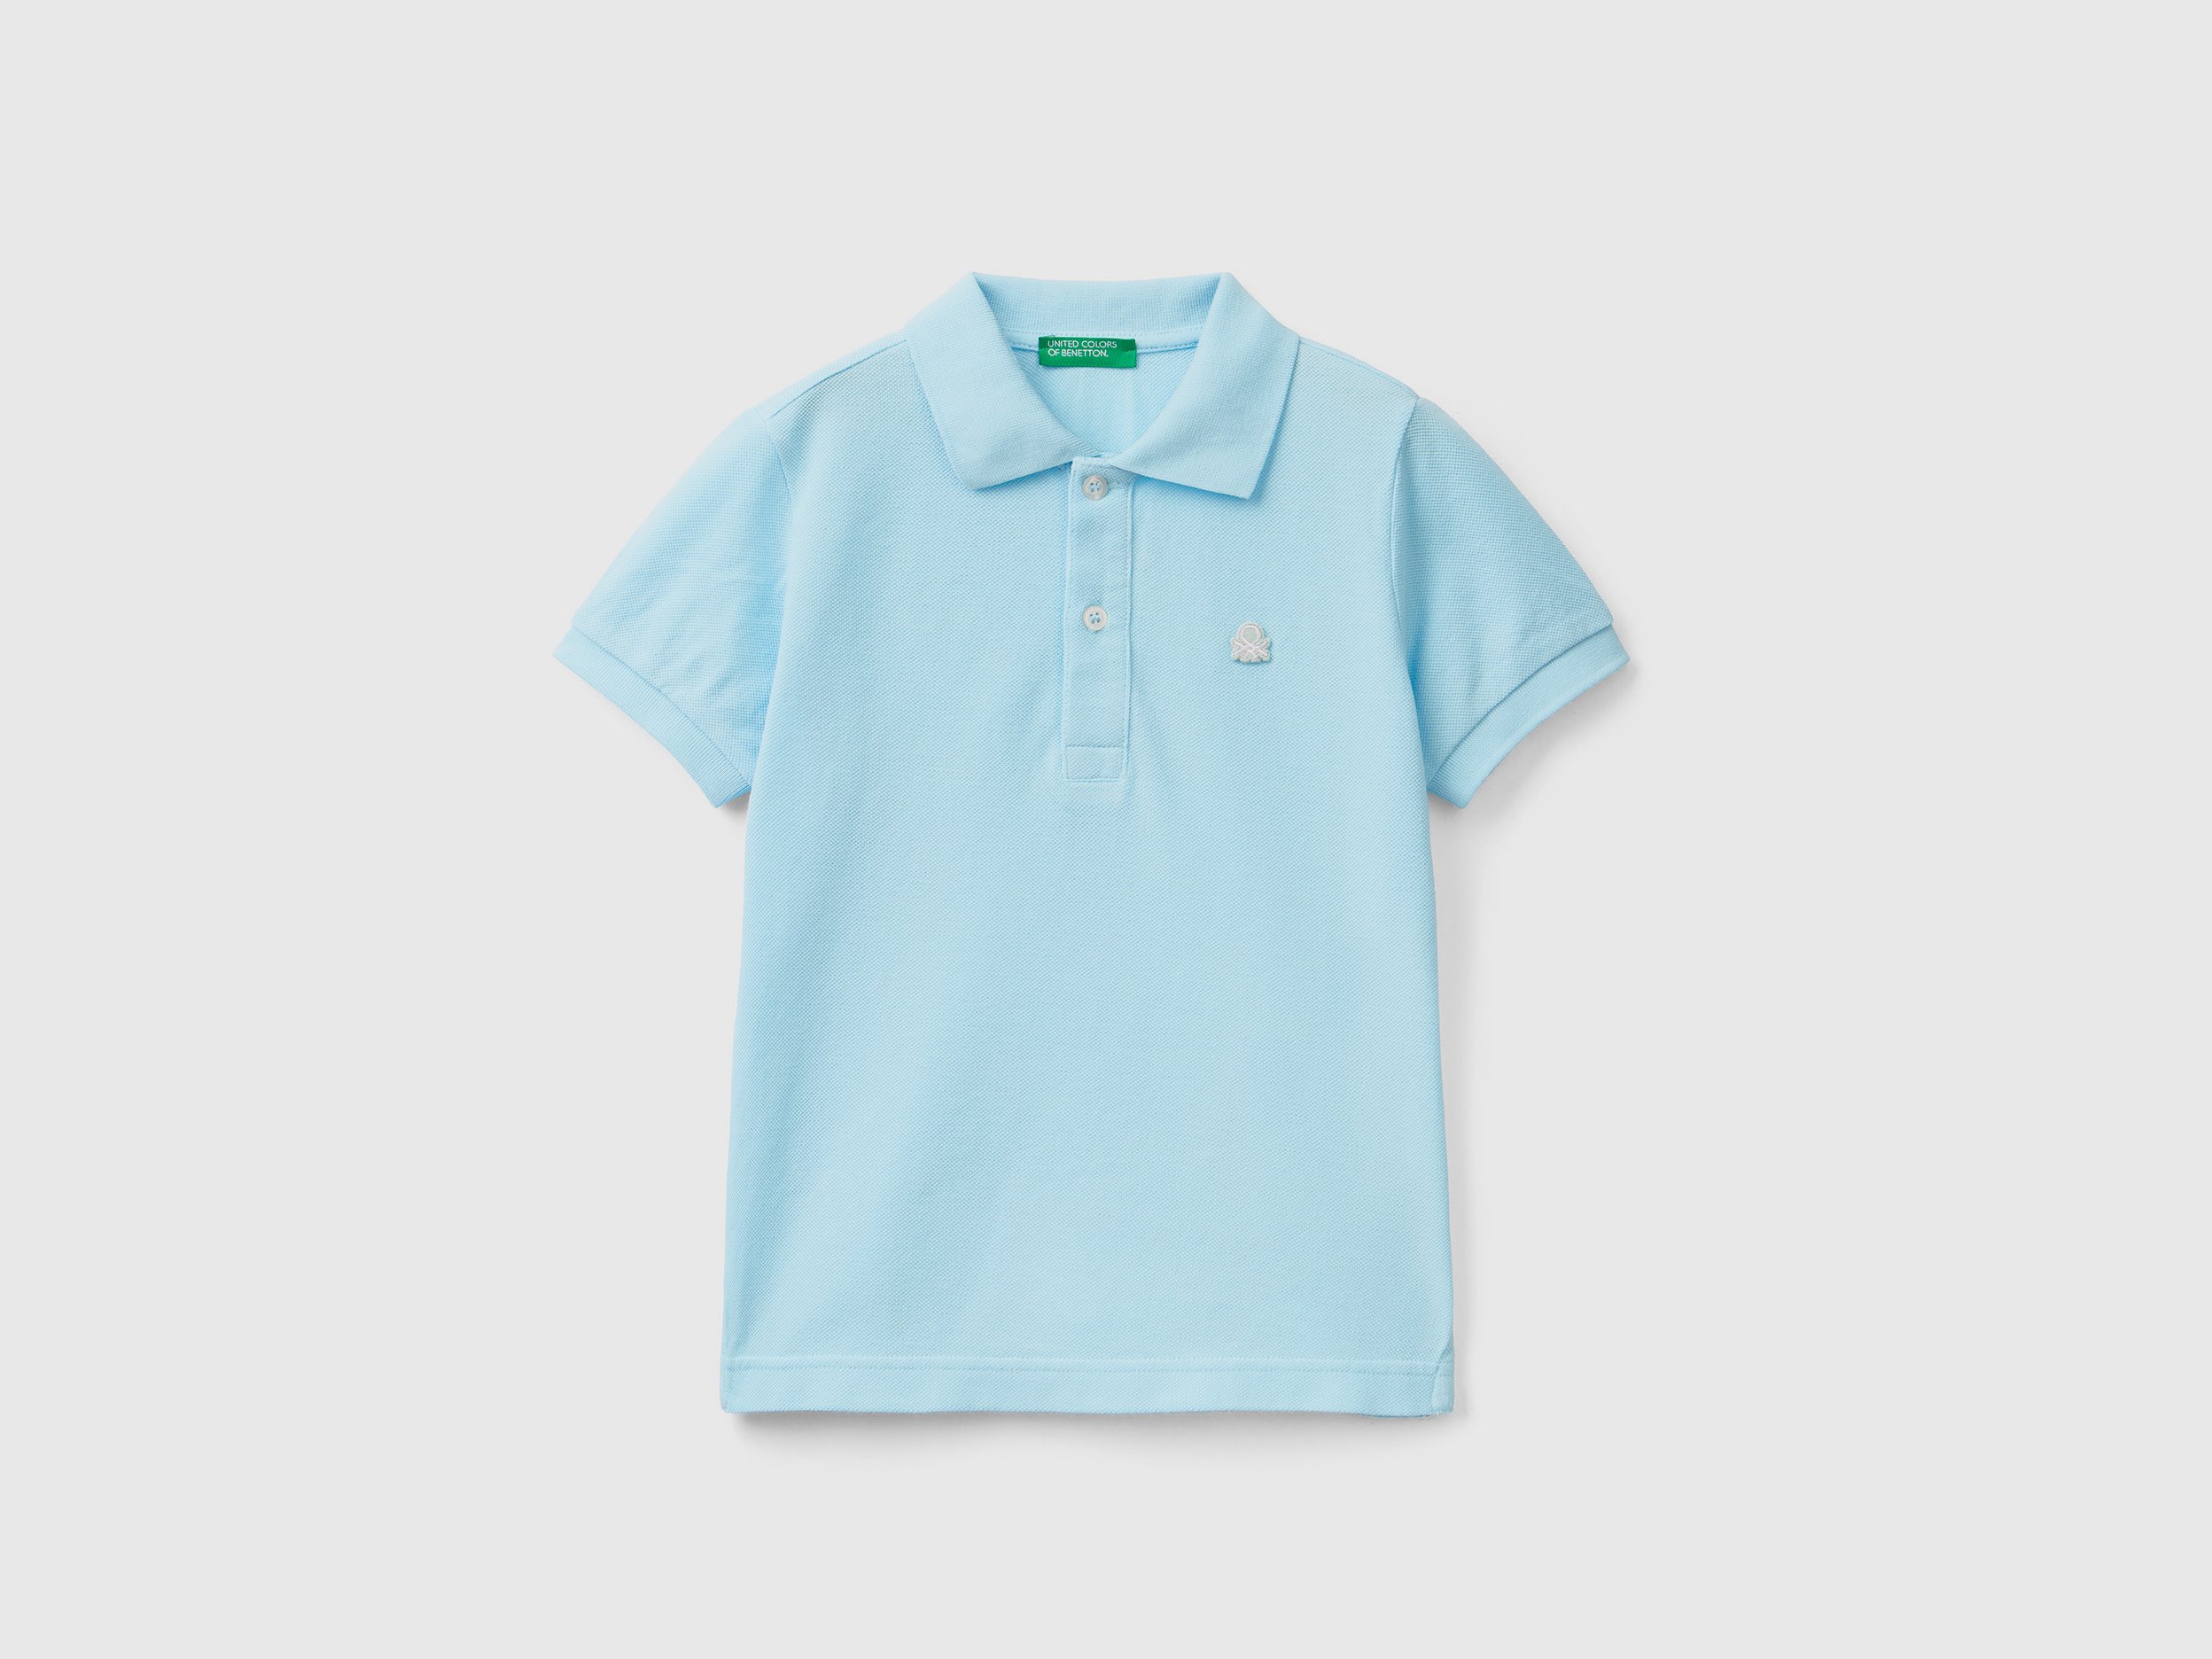 Image of Benetton, Neon Polo In Organic Cotton, size 110, , Kids